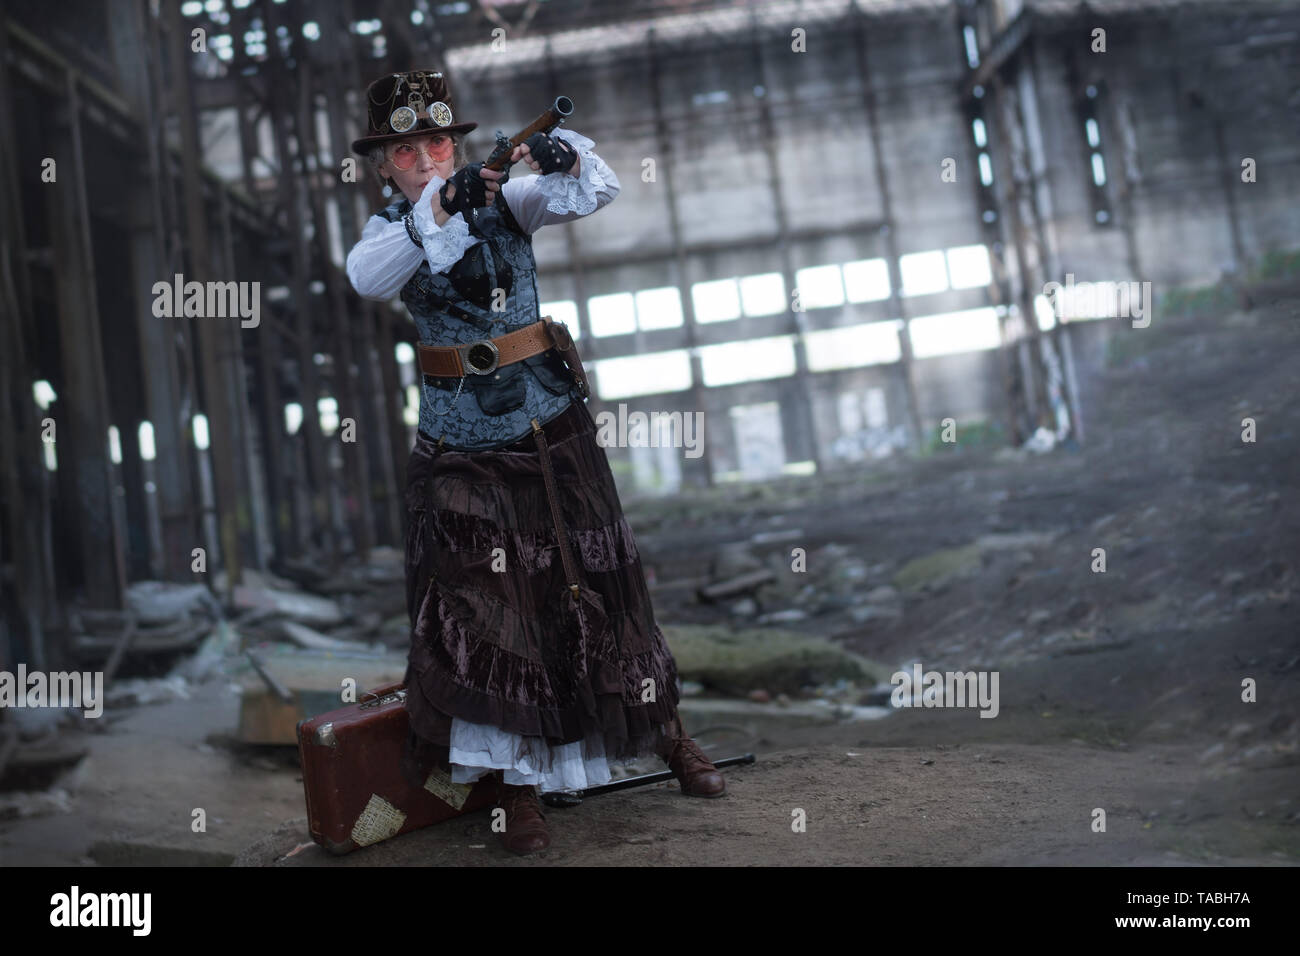 elderly lady in a steampunk costume at an abandoned factory with arms in hand. Stock Photo